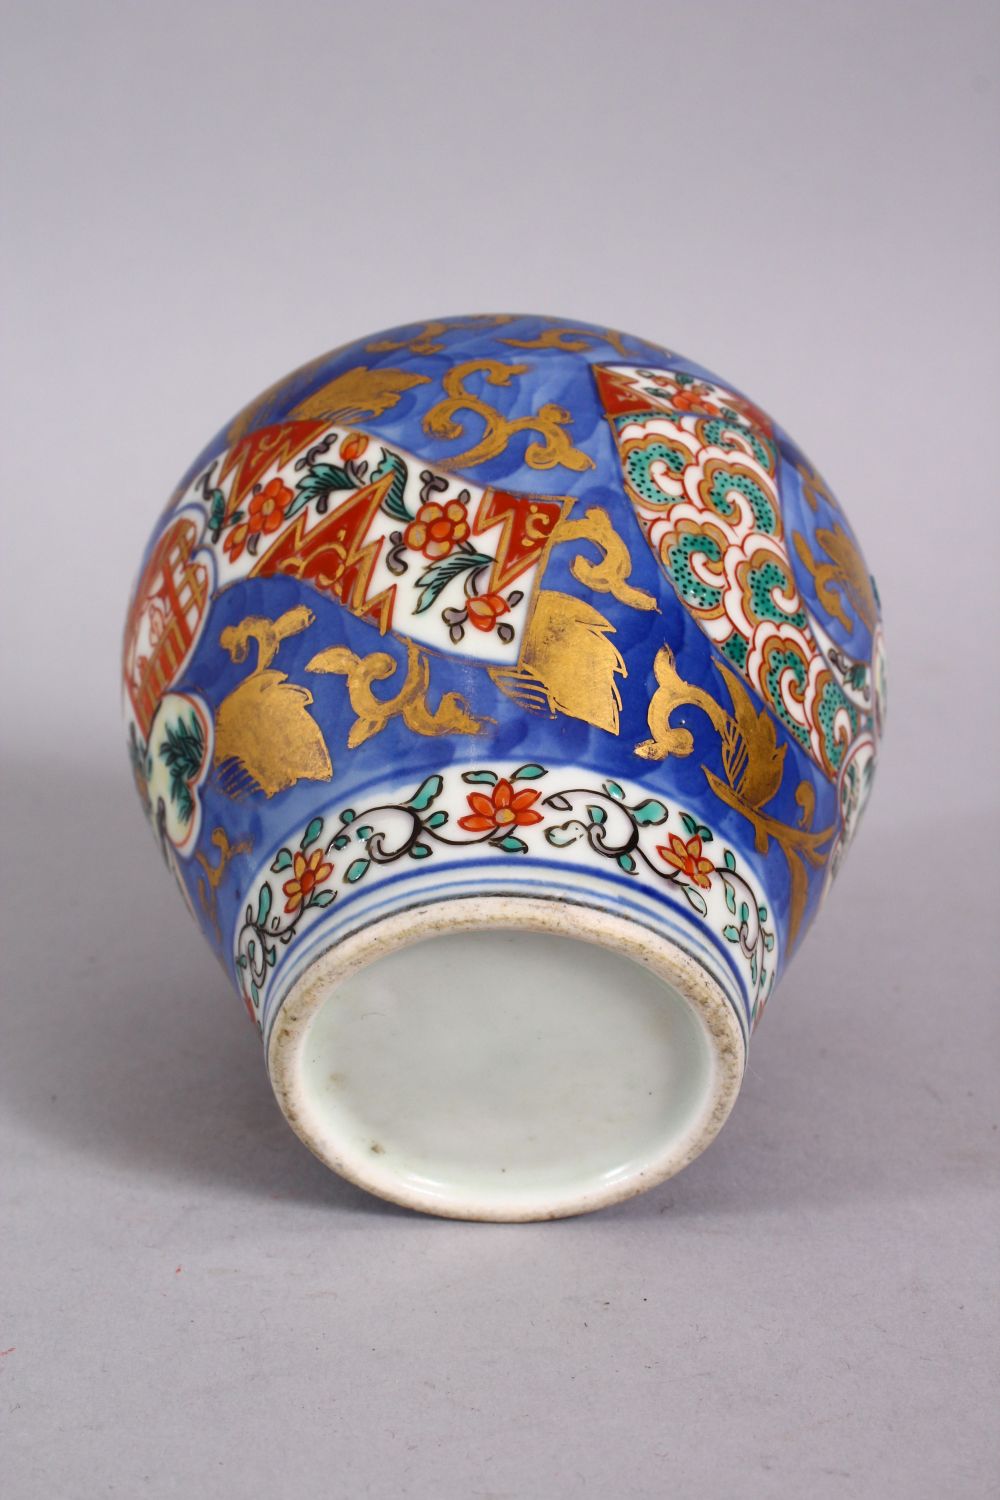 AN 18TH CENTURY JAPANESE BLUE, WHITE AND IRON RED PORCELAIN ARITA JAR & COVER, with landscape - Image 6 of 6